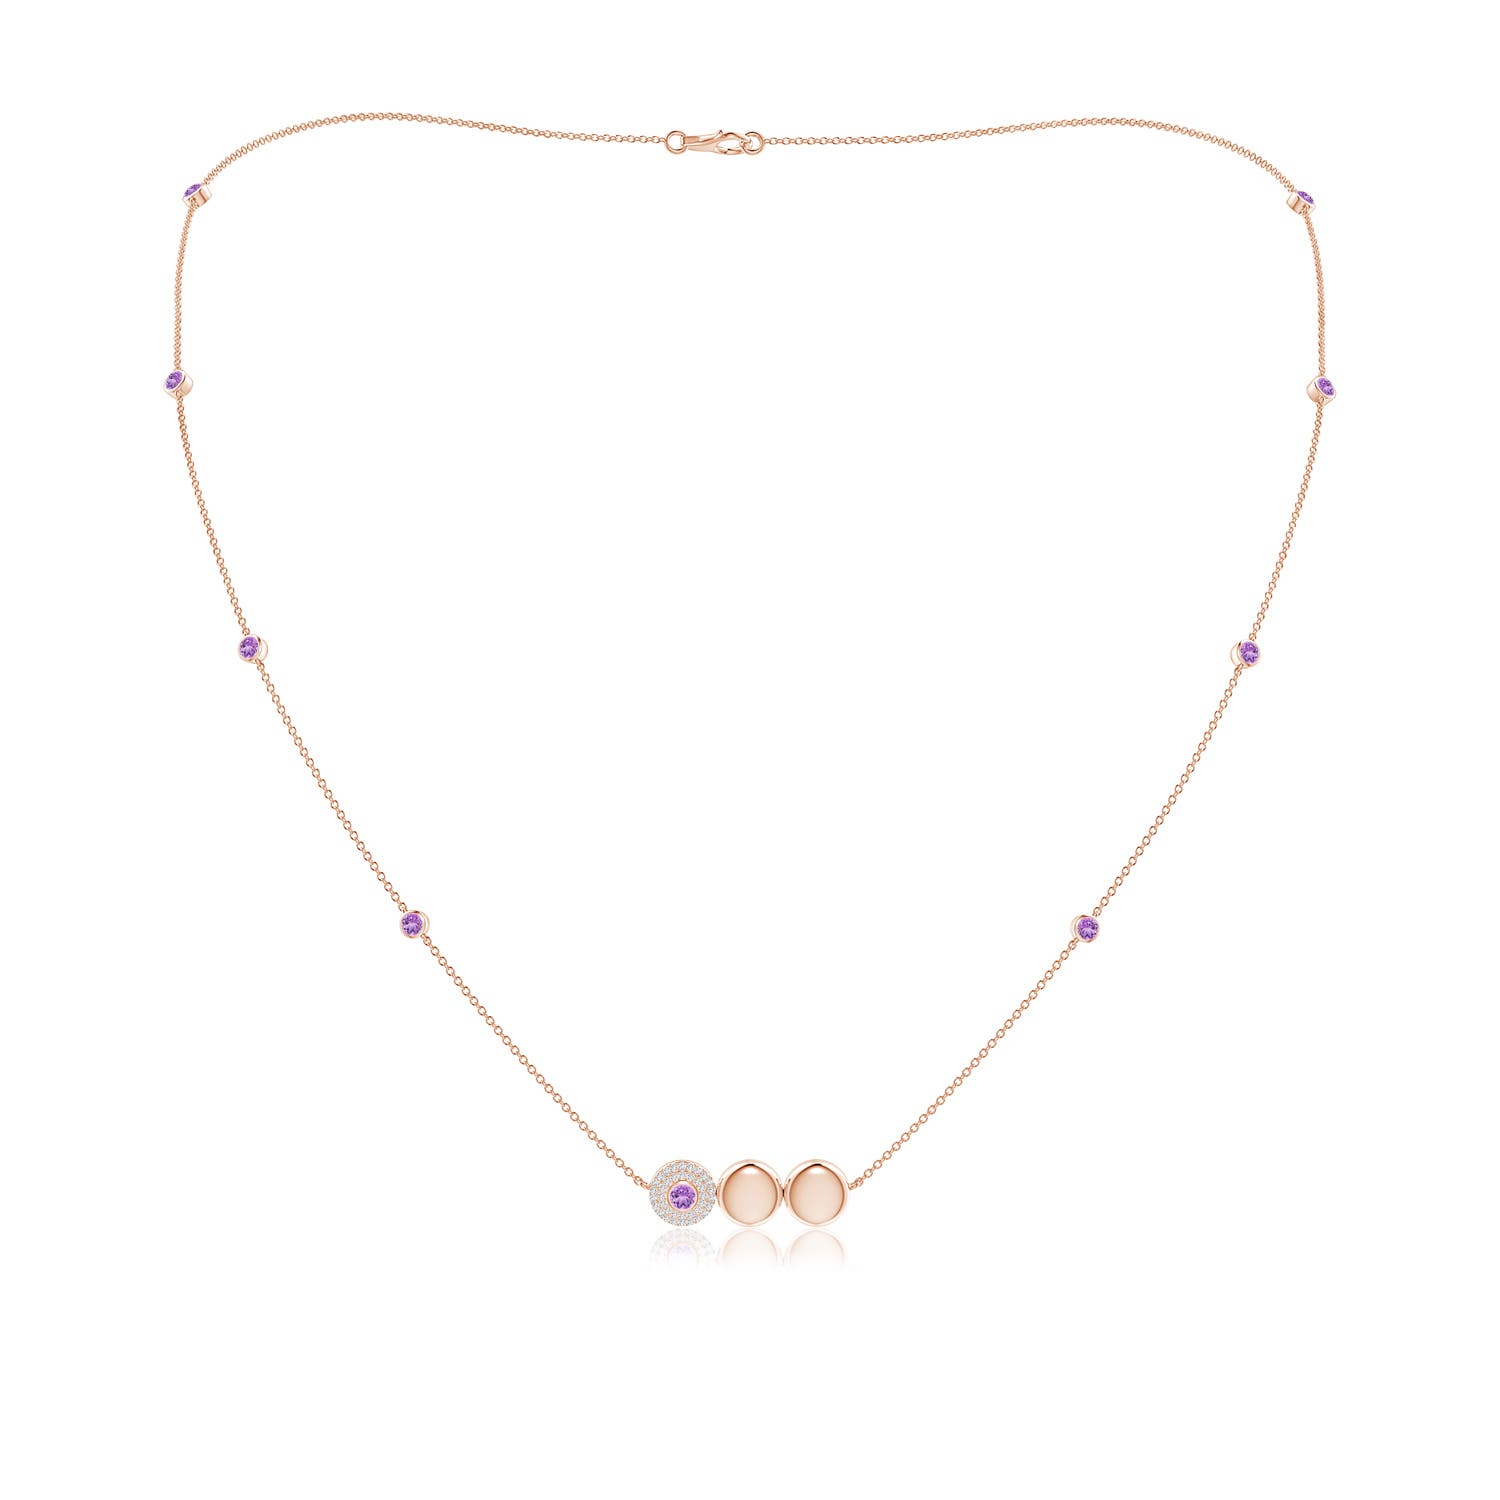 AAA - Amethyst / 1.09 CT / 14 KT Rose Gold